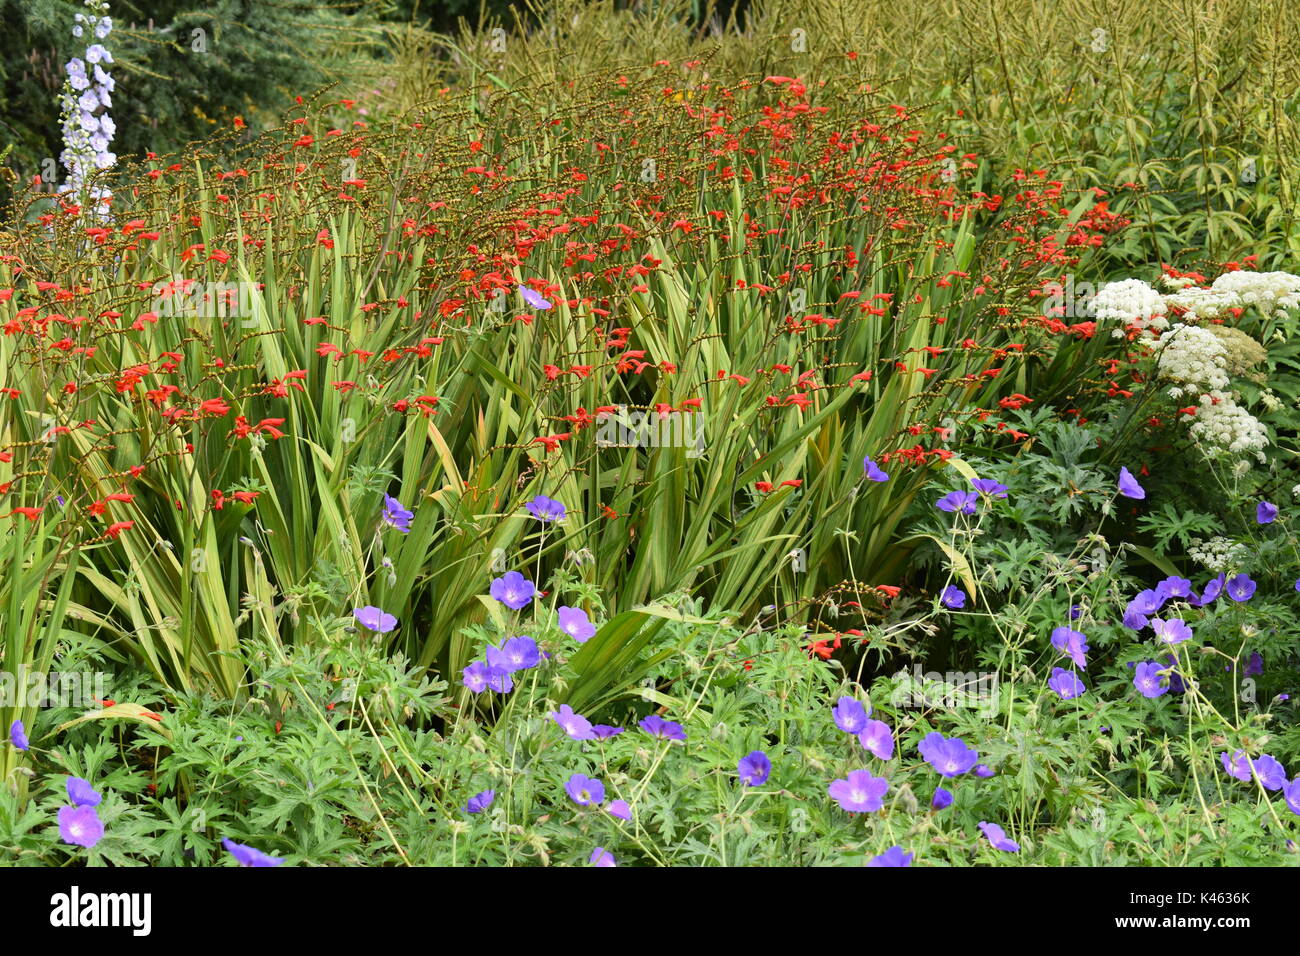 Herbaceous border in London with blue hardy geranium, orange crocosmia, delphinium and Queen Anne's Lace. Stock Photo